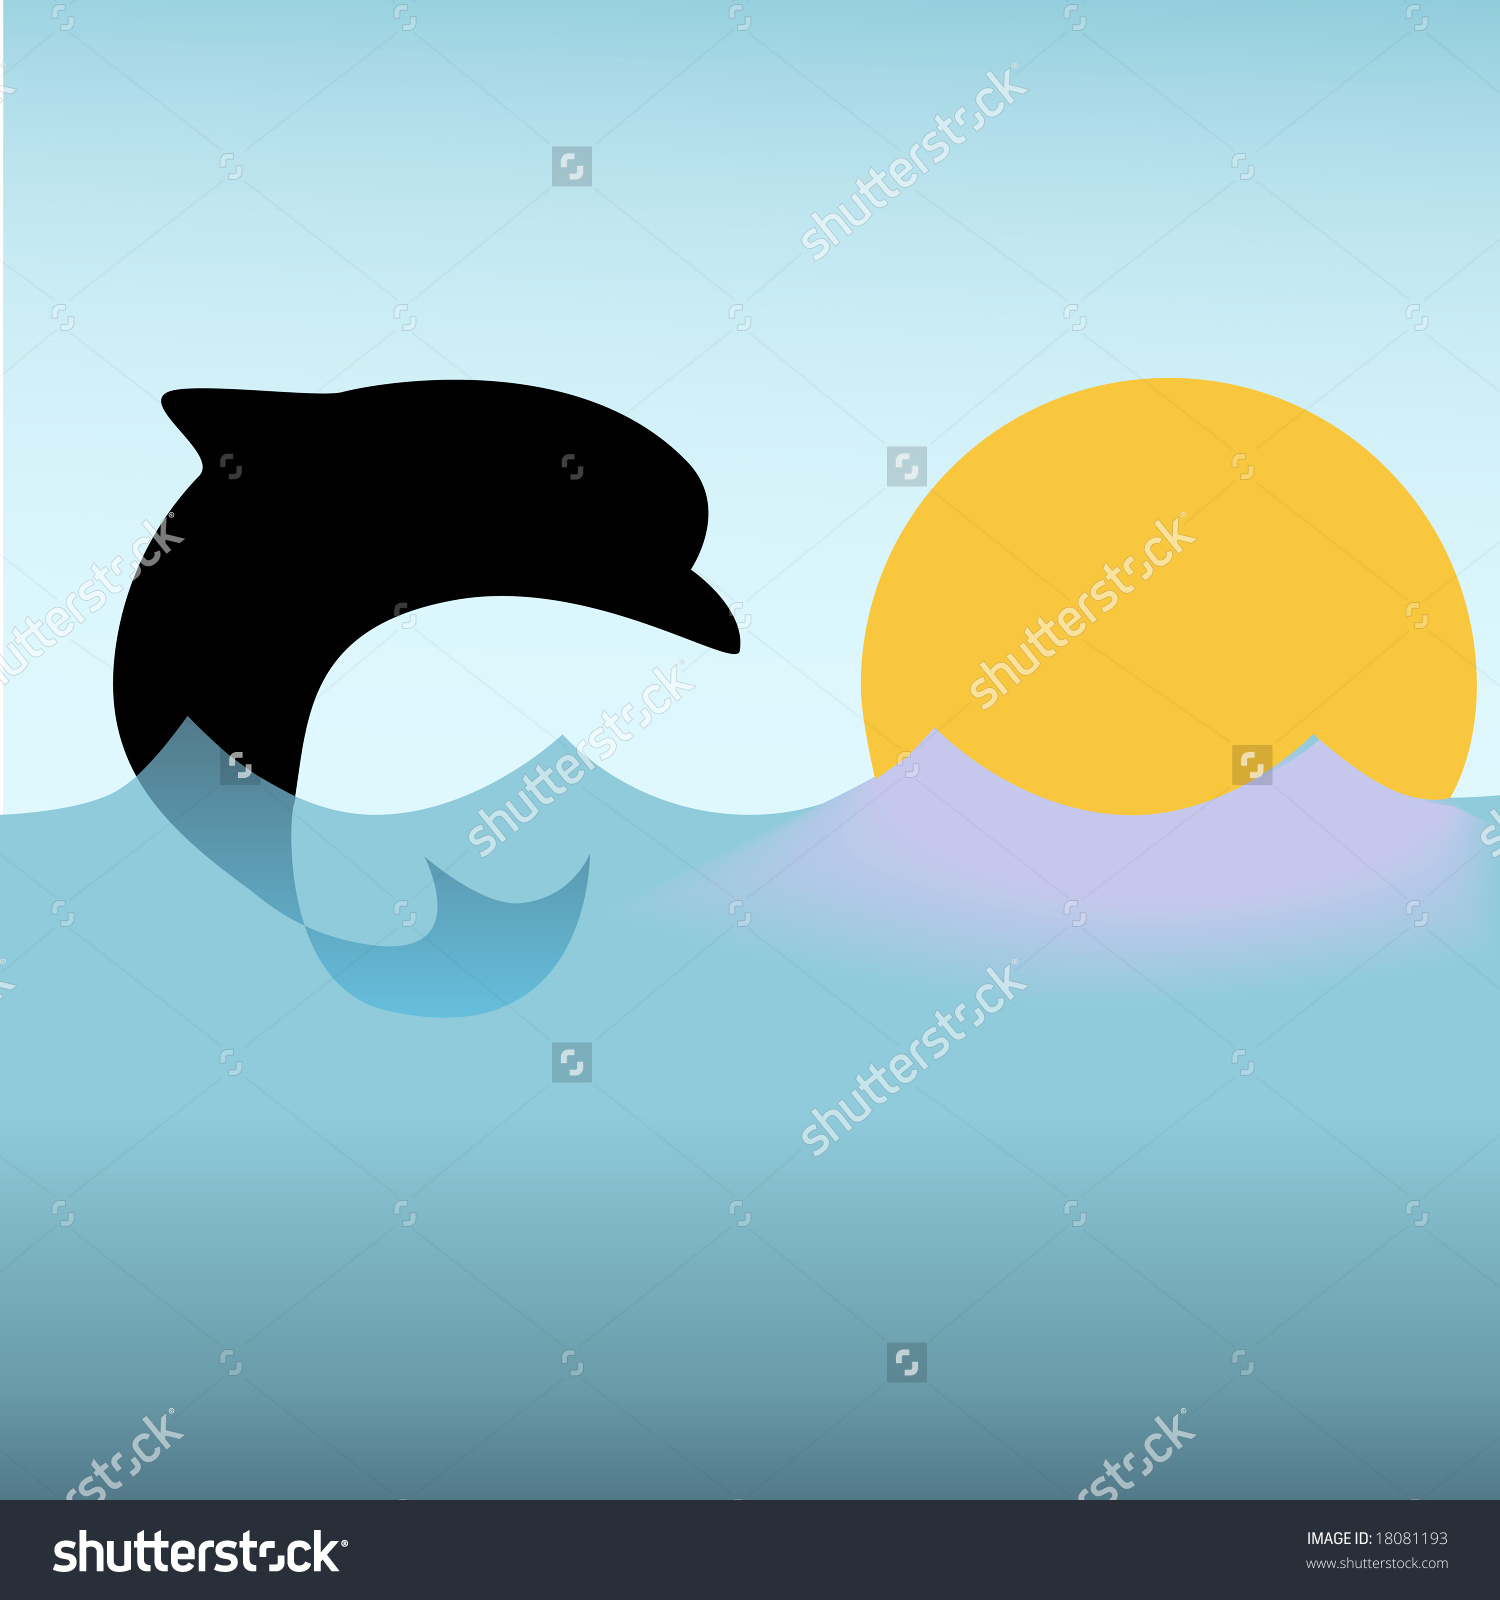 Clipart Dolphin Silhouette Jumps Dives On Stock Vector 18081193.